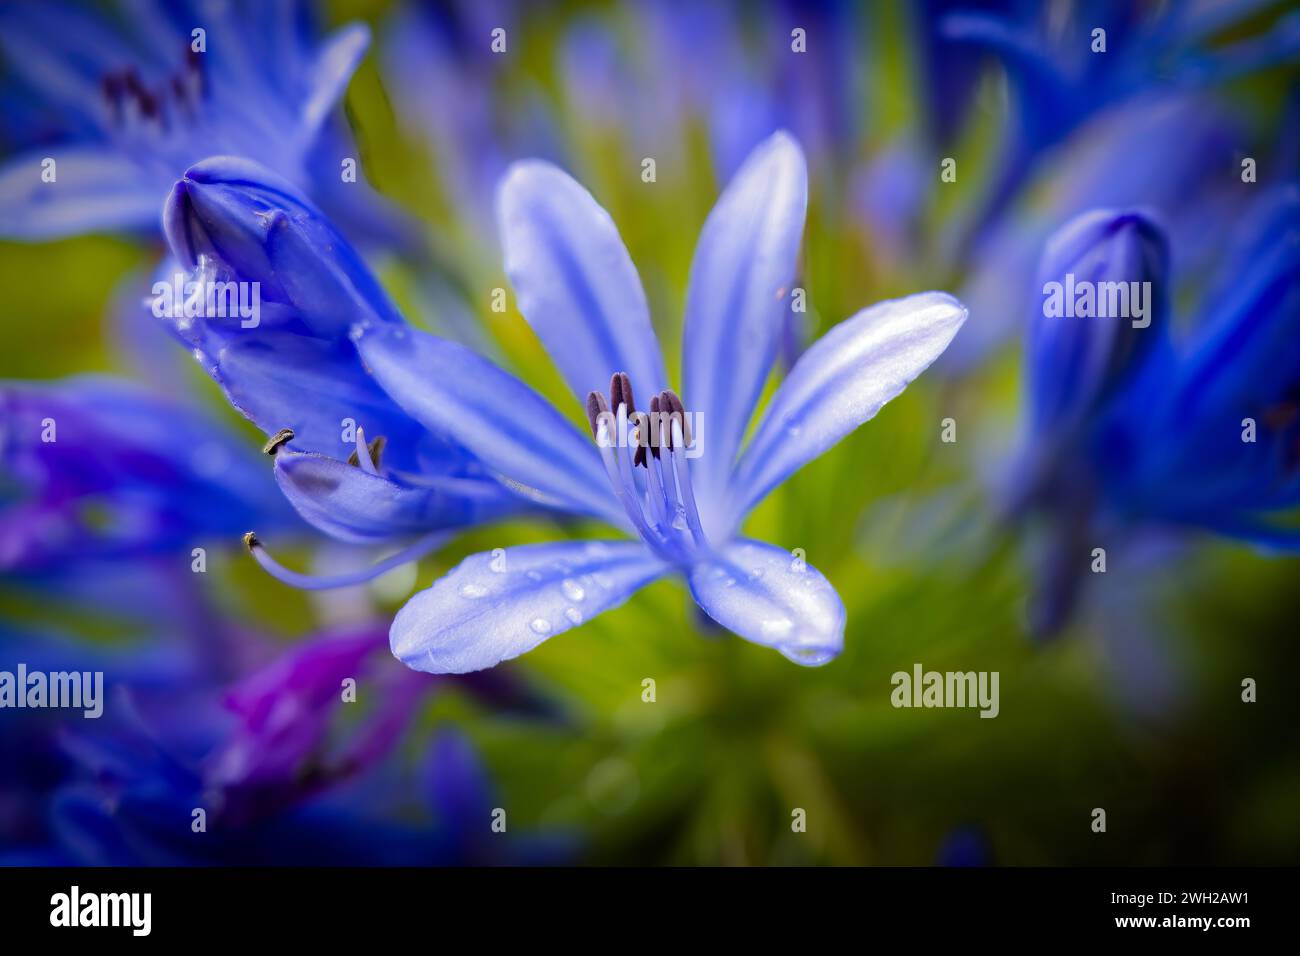 Photo of a blue flower called Agapanthus, after the rain Stock Photo